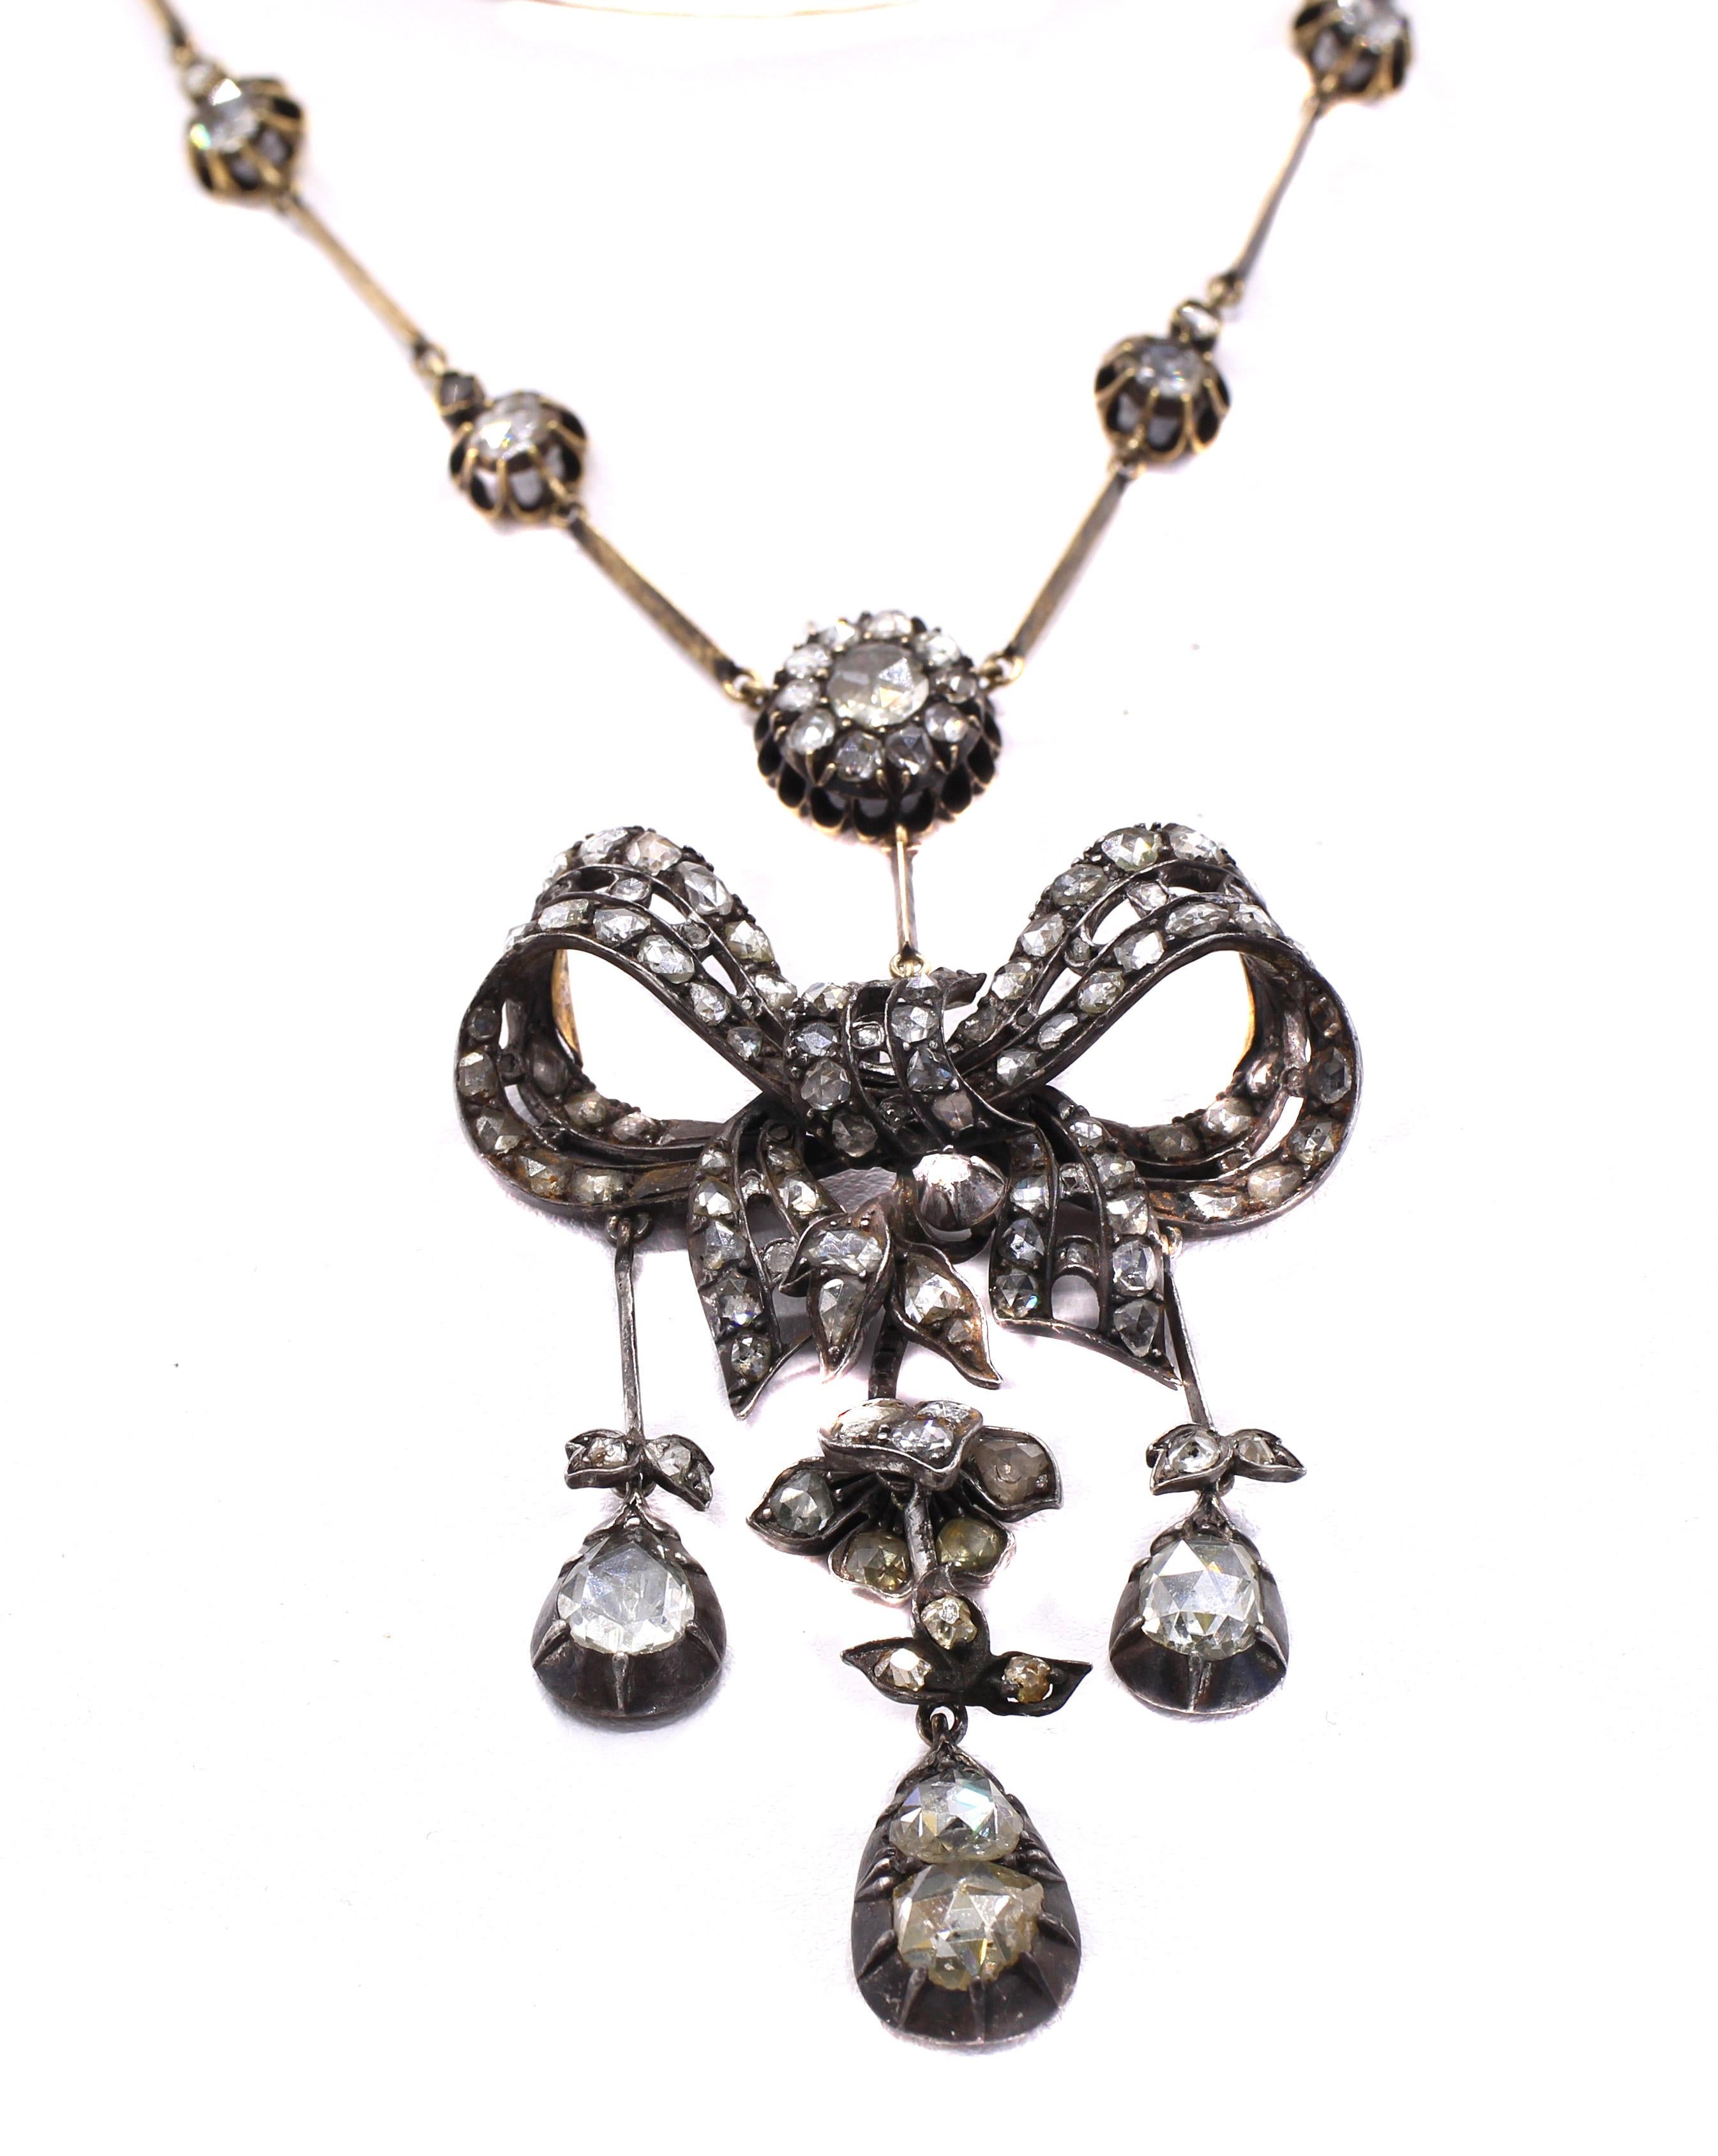 Beautiful early Victorian necklace from ca 1860 worked in silver on gold set with rose cut diamonds. The center piece designed as a bow with 3 flexible pendant elements extending set with 2 larger pear shape rose cuts and 1 round rose cut diamond.